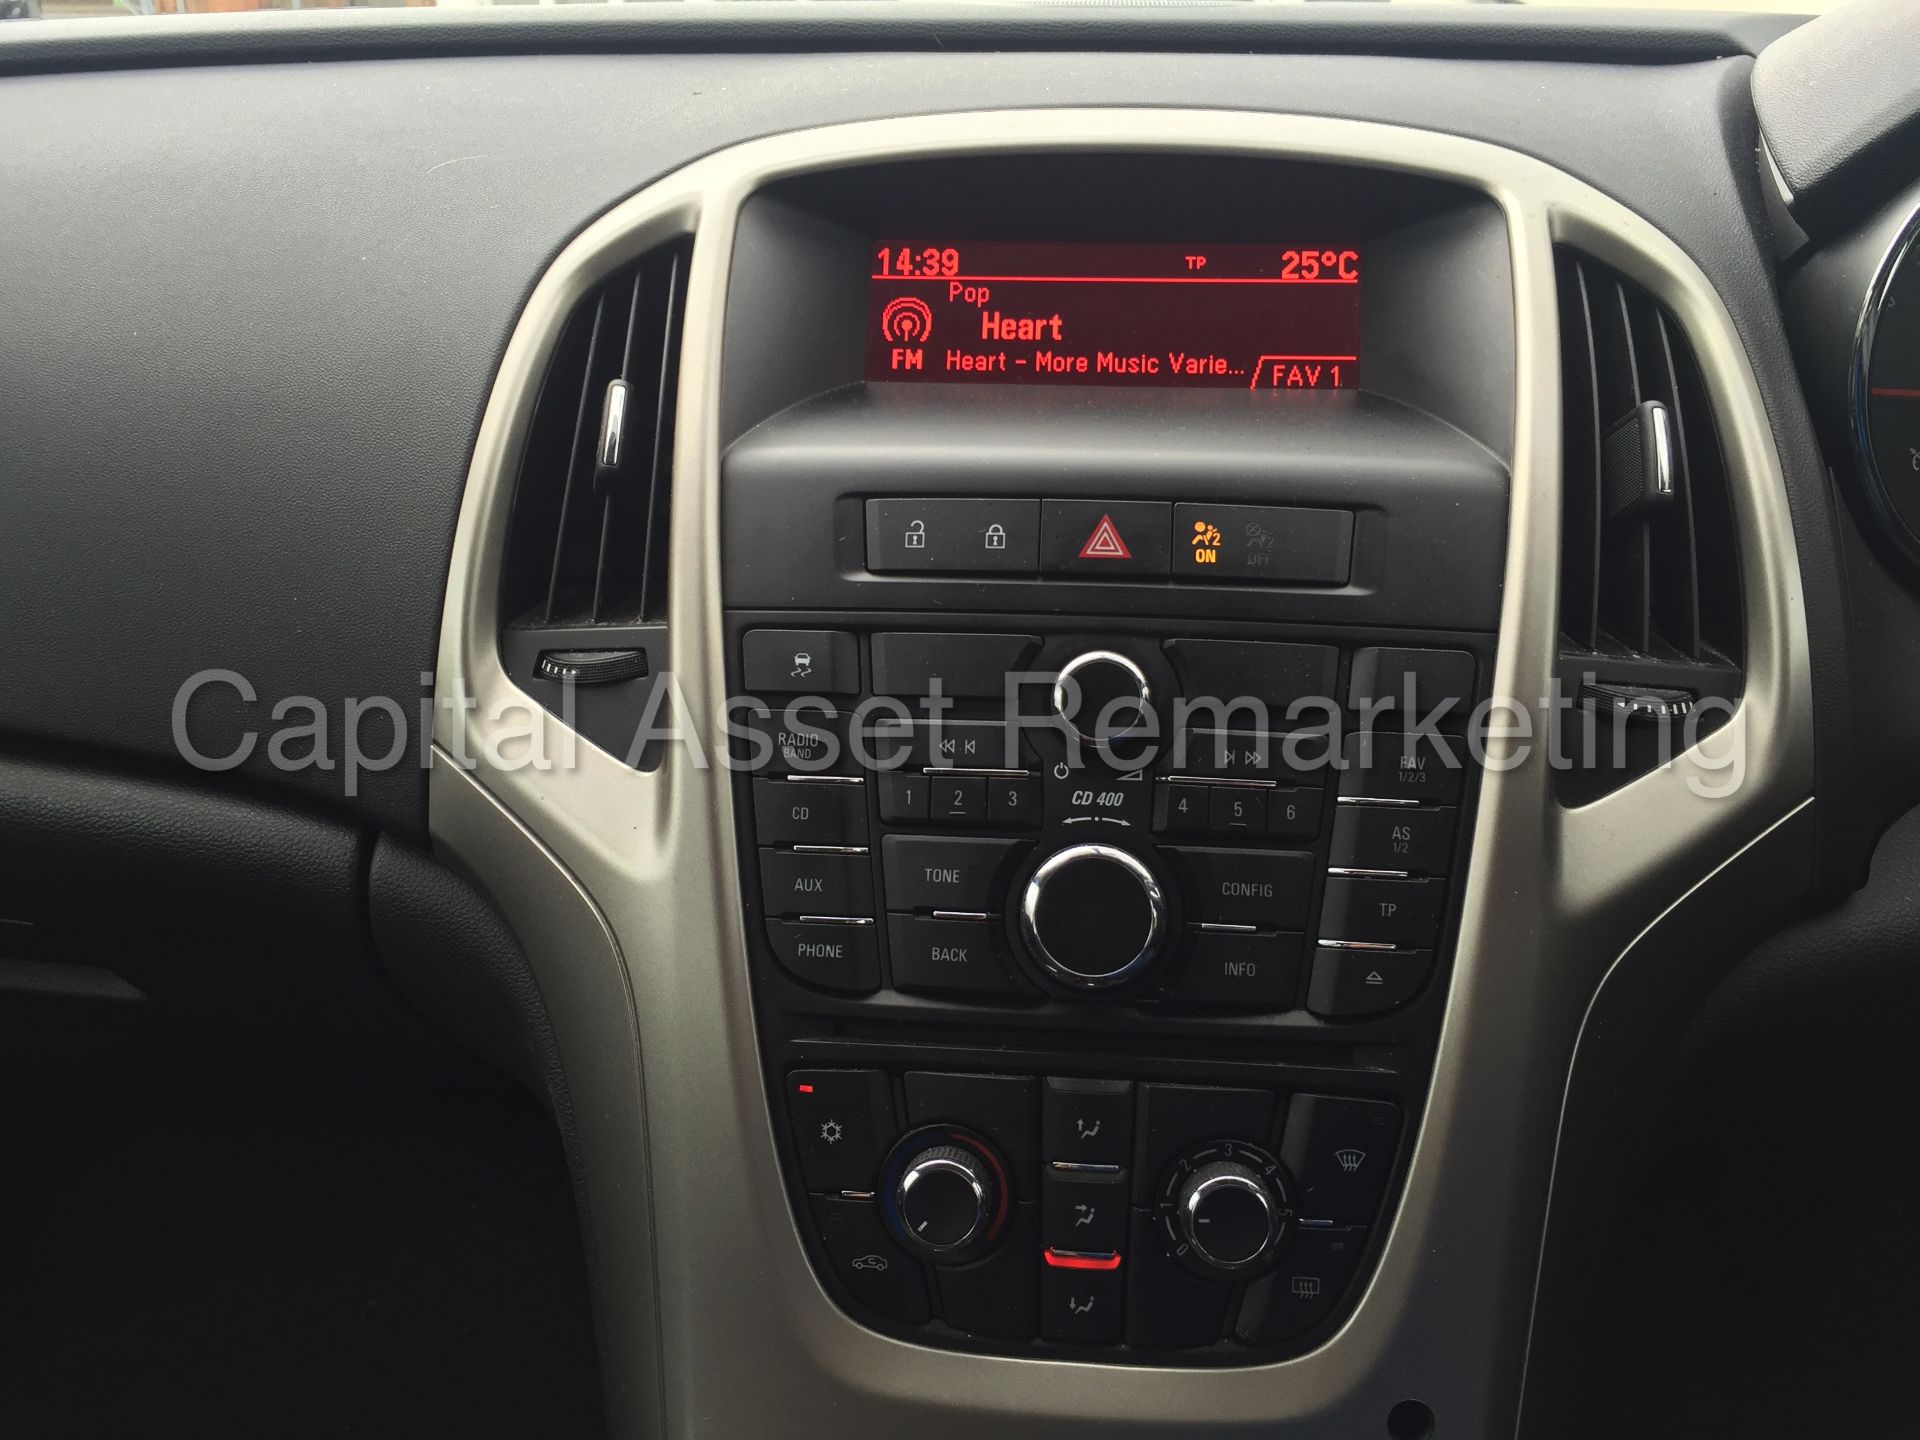 VAUXHALL ASTRA 'EXCLUSIVE' (2012 MODEL) '1.7 CDTI - ECOFLEX - 6 SPEED' *AIR CON* NO VAT - Image 11 of 24